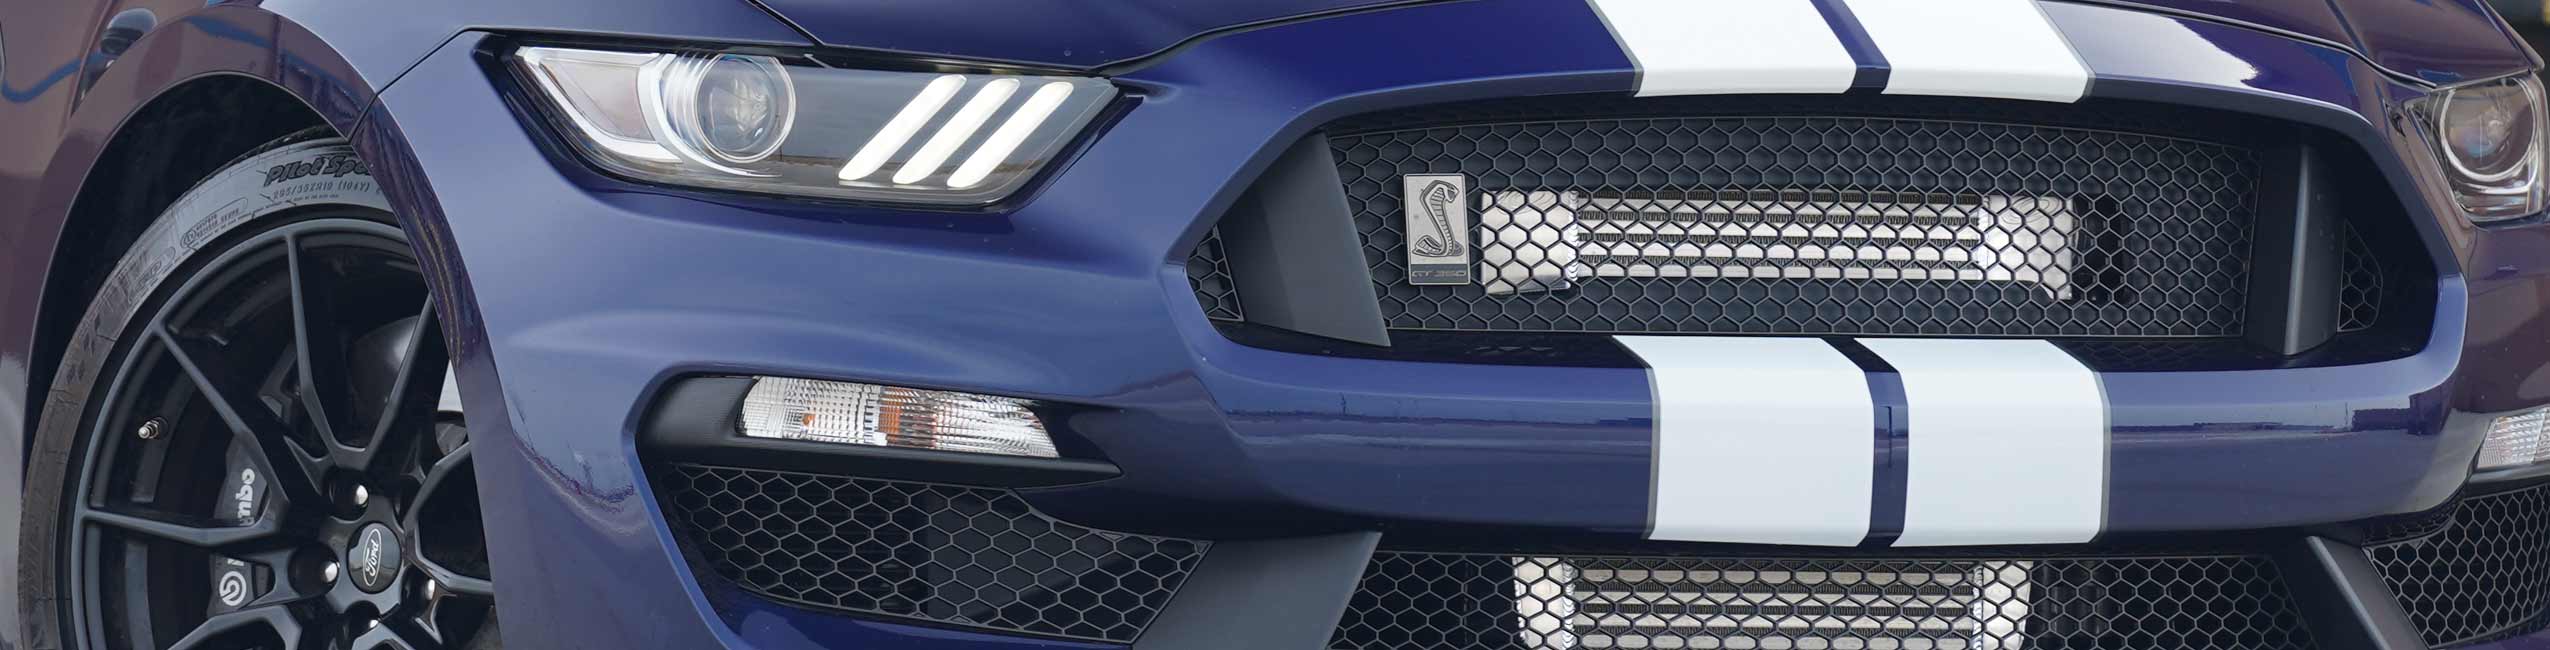 2020-2015 MUSTANG SHELBY GT350